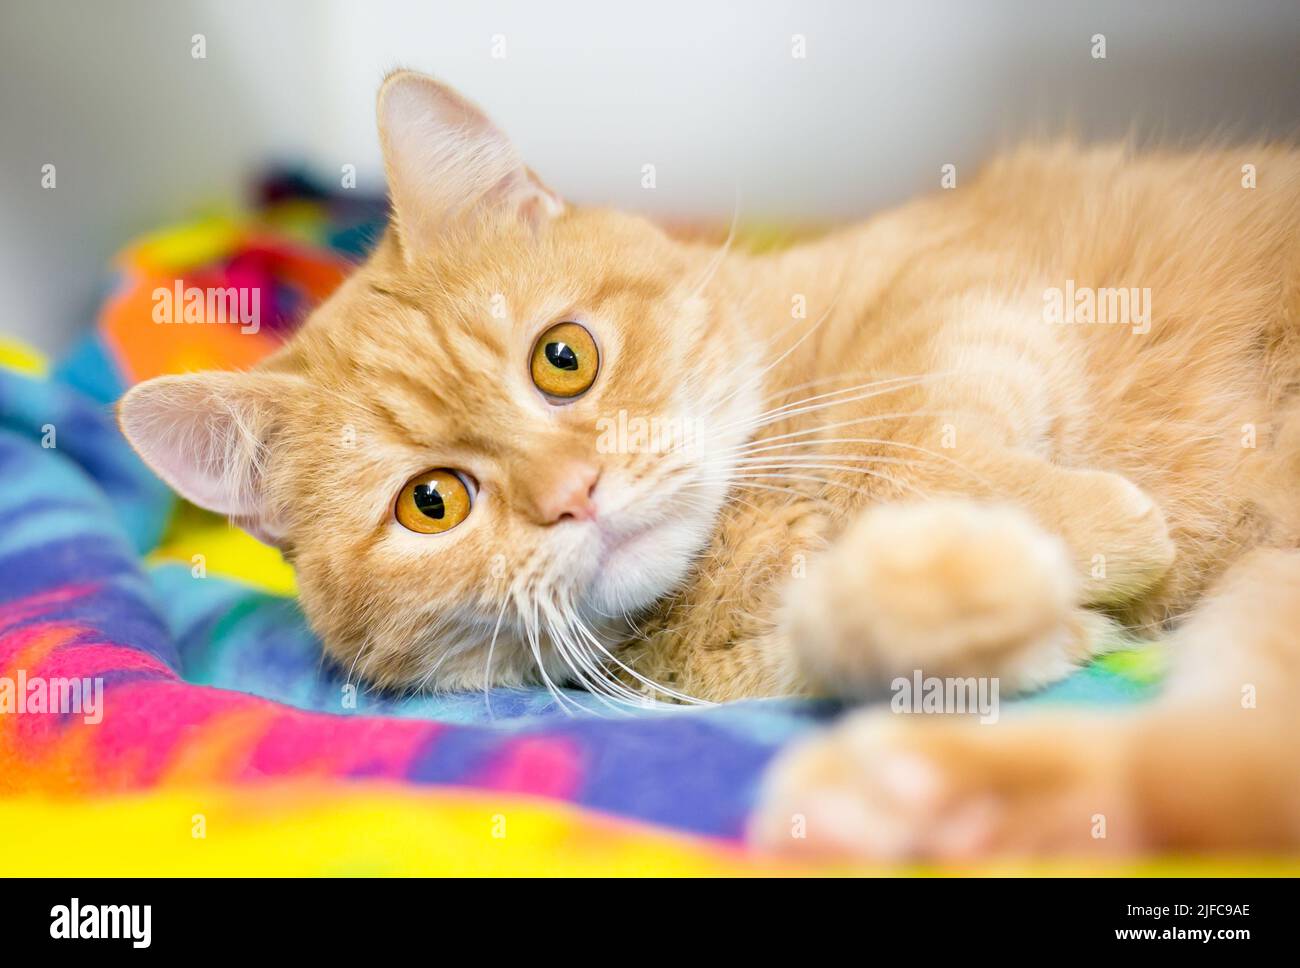 A cute orange tabby ginger cat lying on a colorful blanket Stock Photo